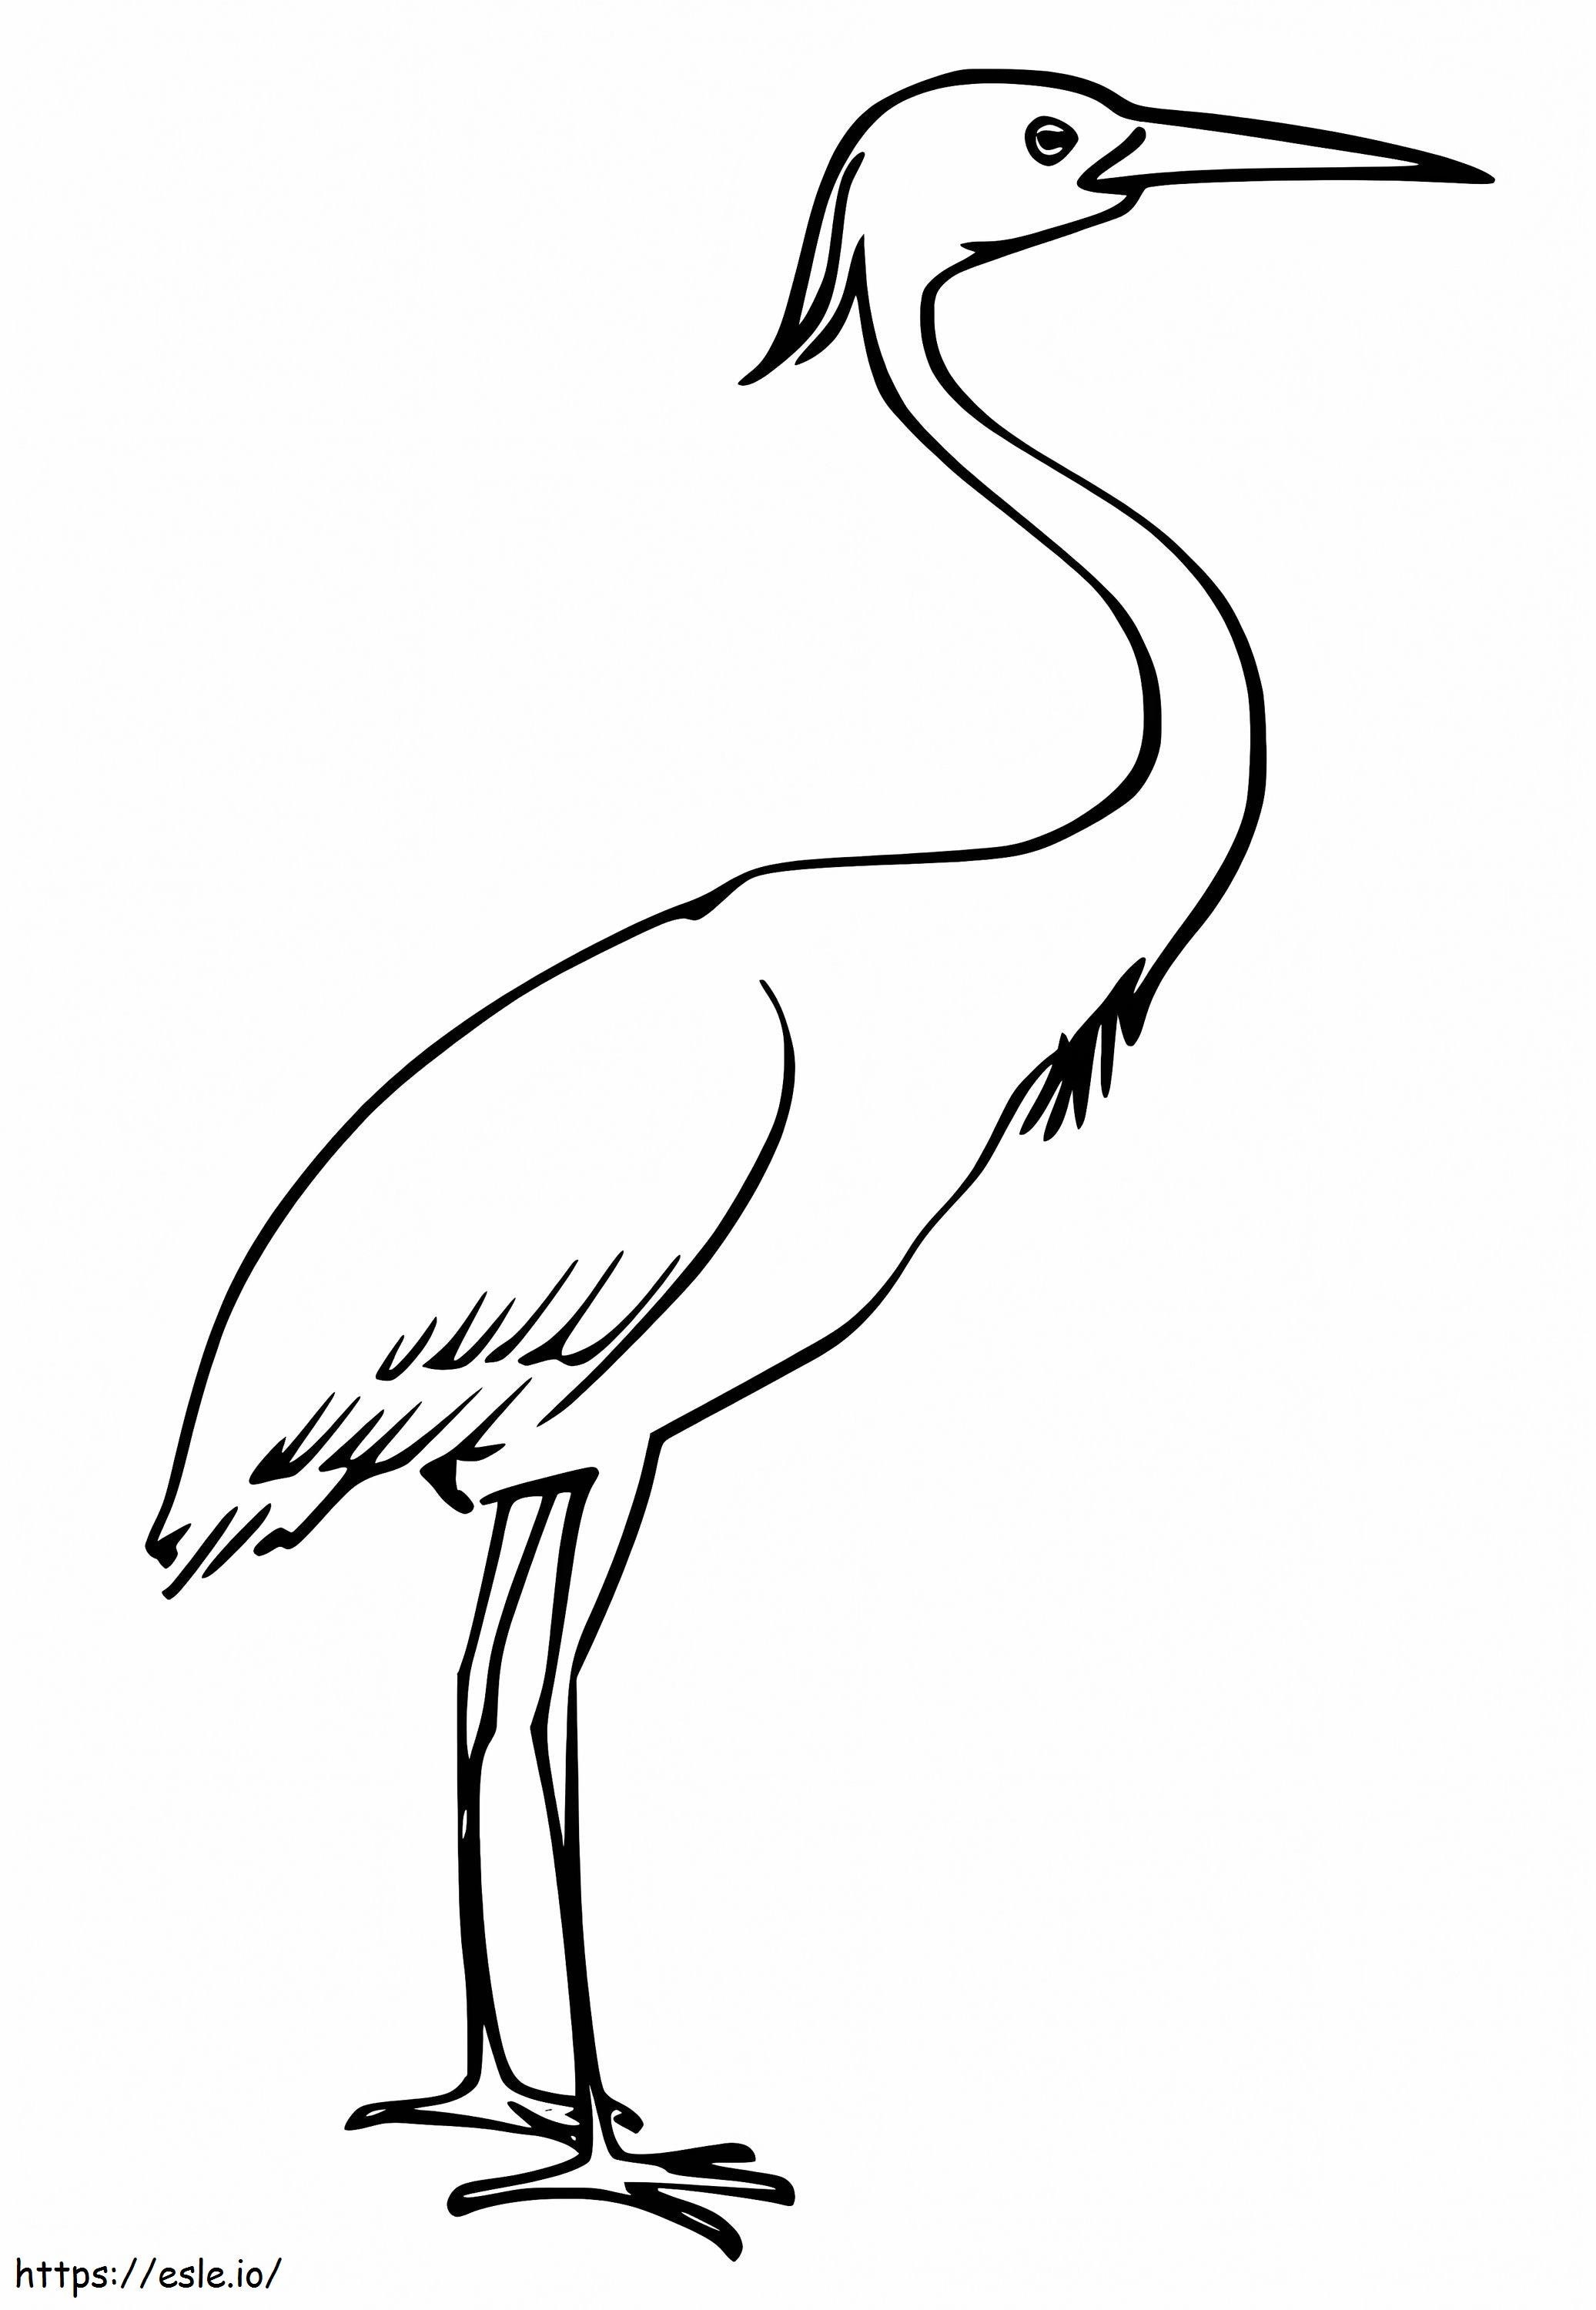 Miss Crane coloring page